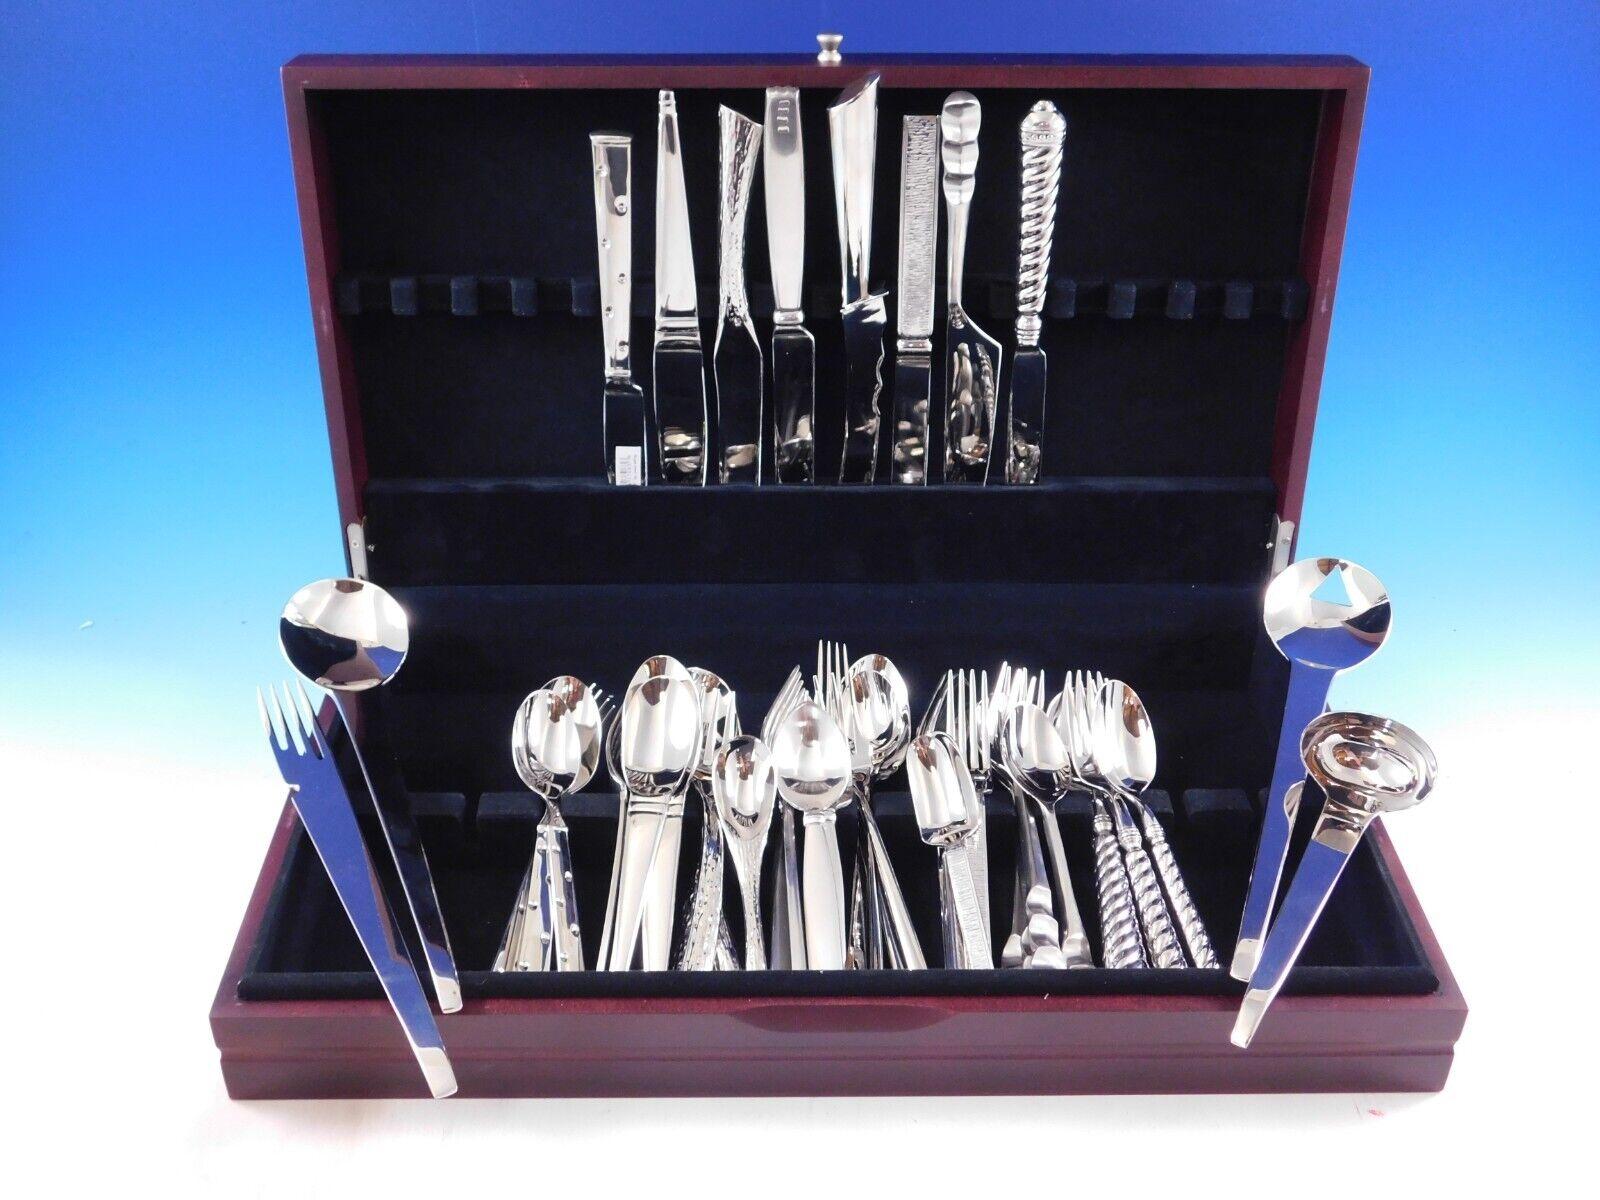 Awesome high quality Modern designer patterns in a unique mixed (harlequin) stainless steel flatware service for 8  - 44 pieces total.

This set includes one 5-piece place setting (1 dinner knife, 1 dinner fork, 1 salad fork, 1 teaspoon, and 1